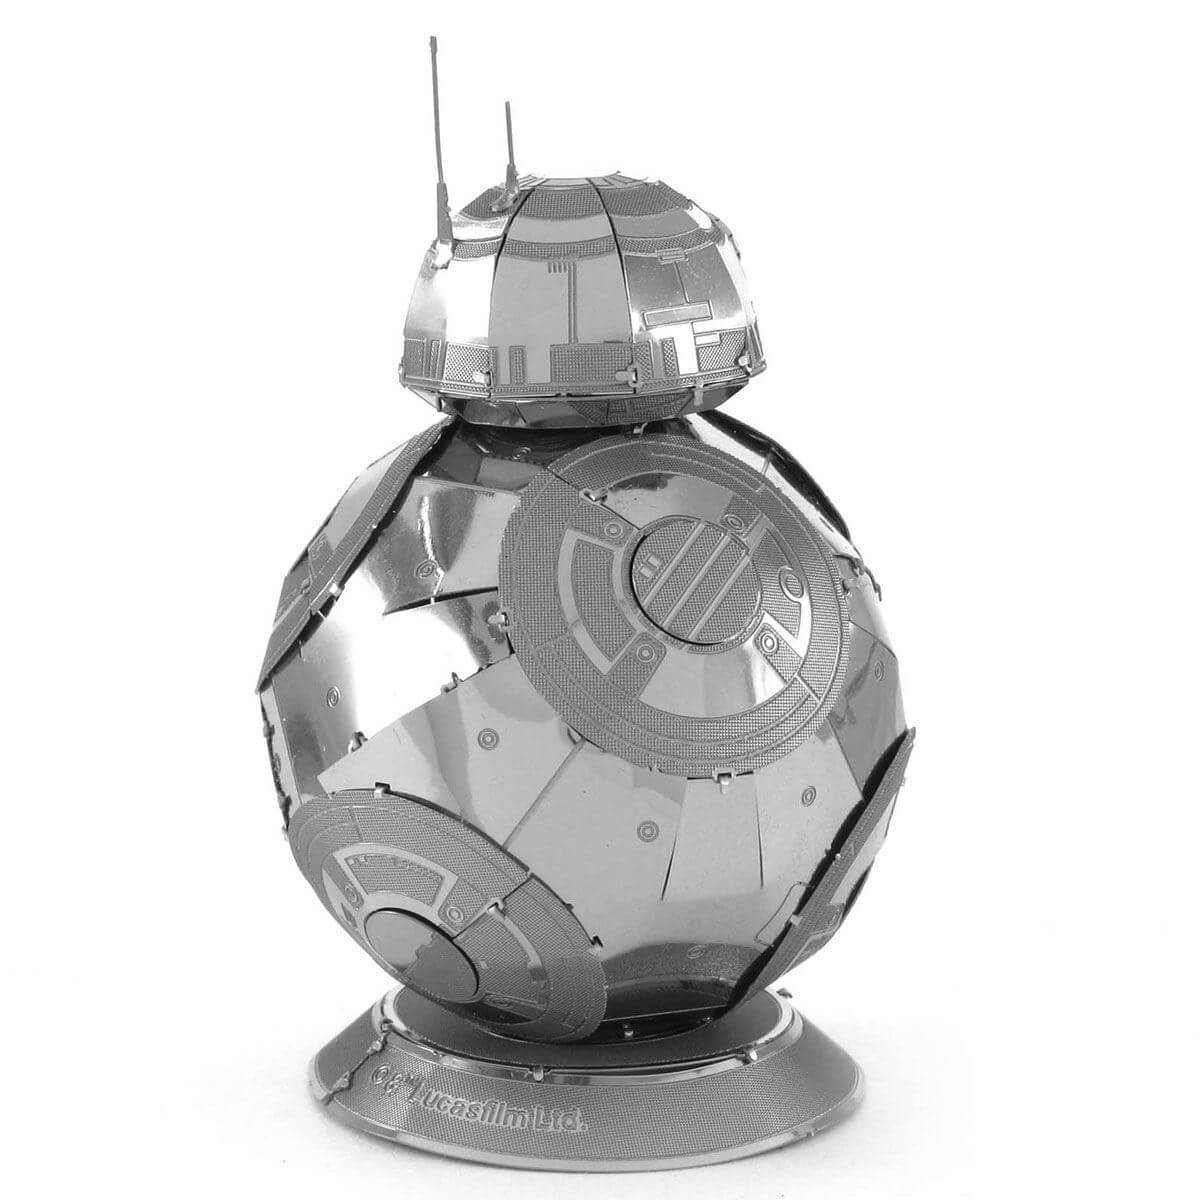 Side view of the metal droid.